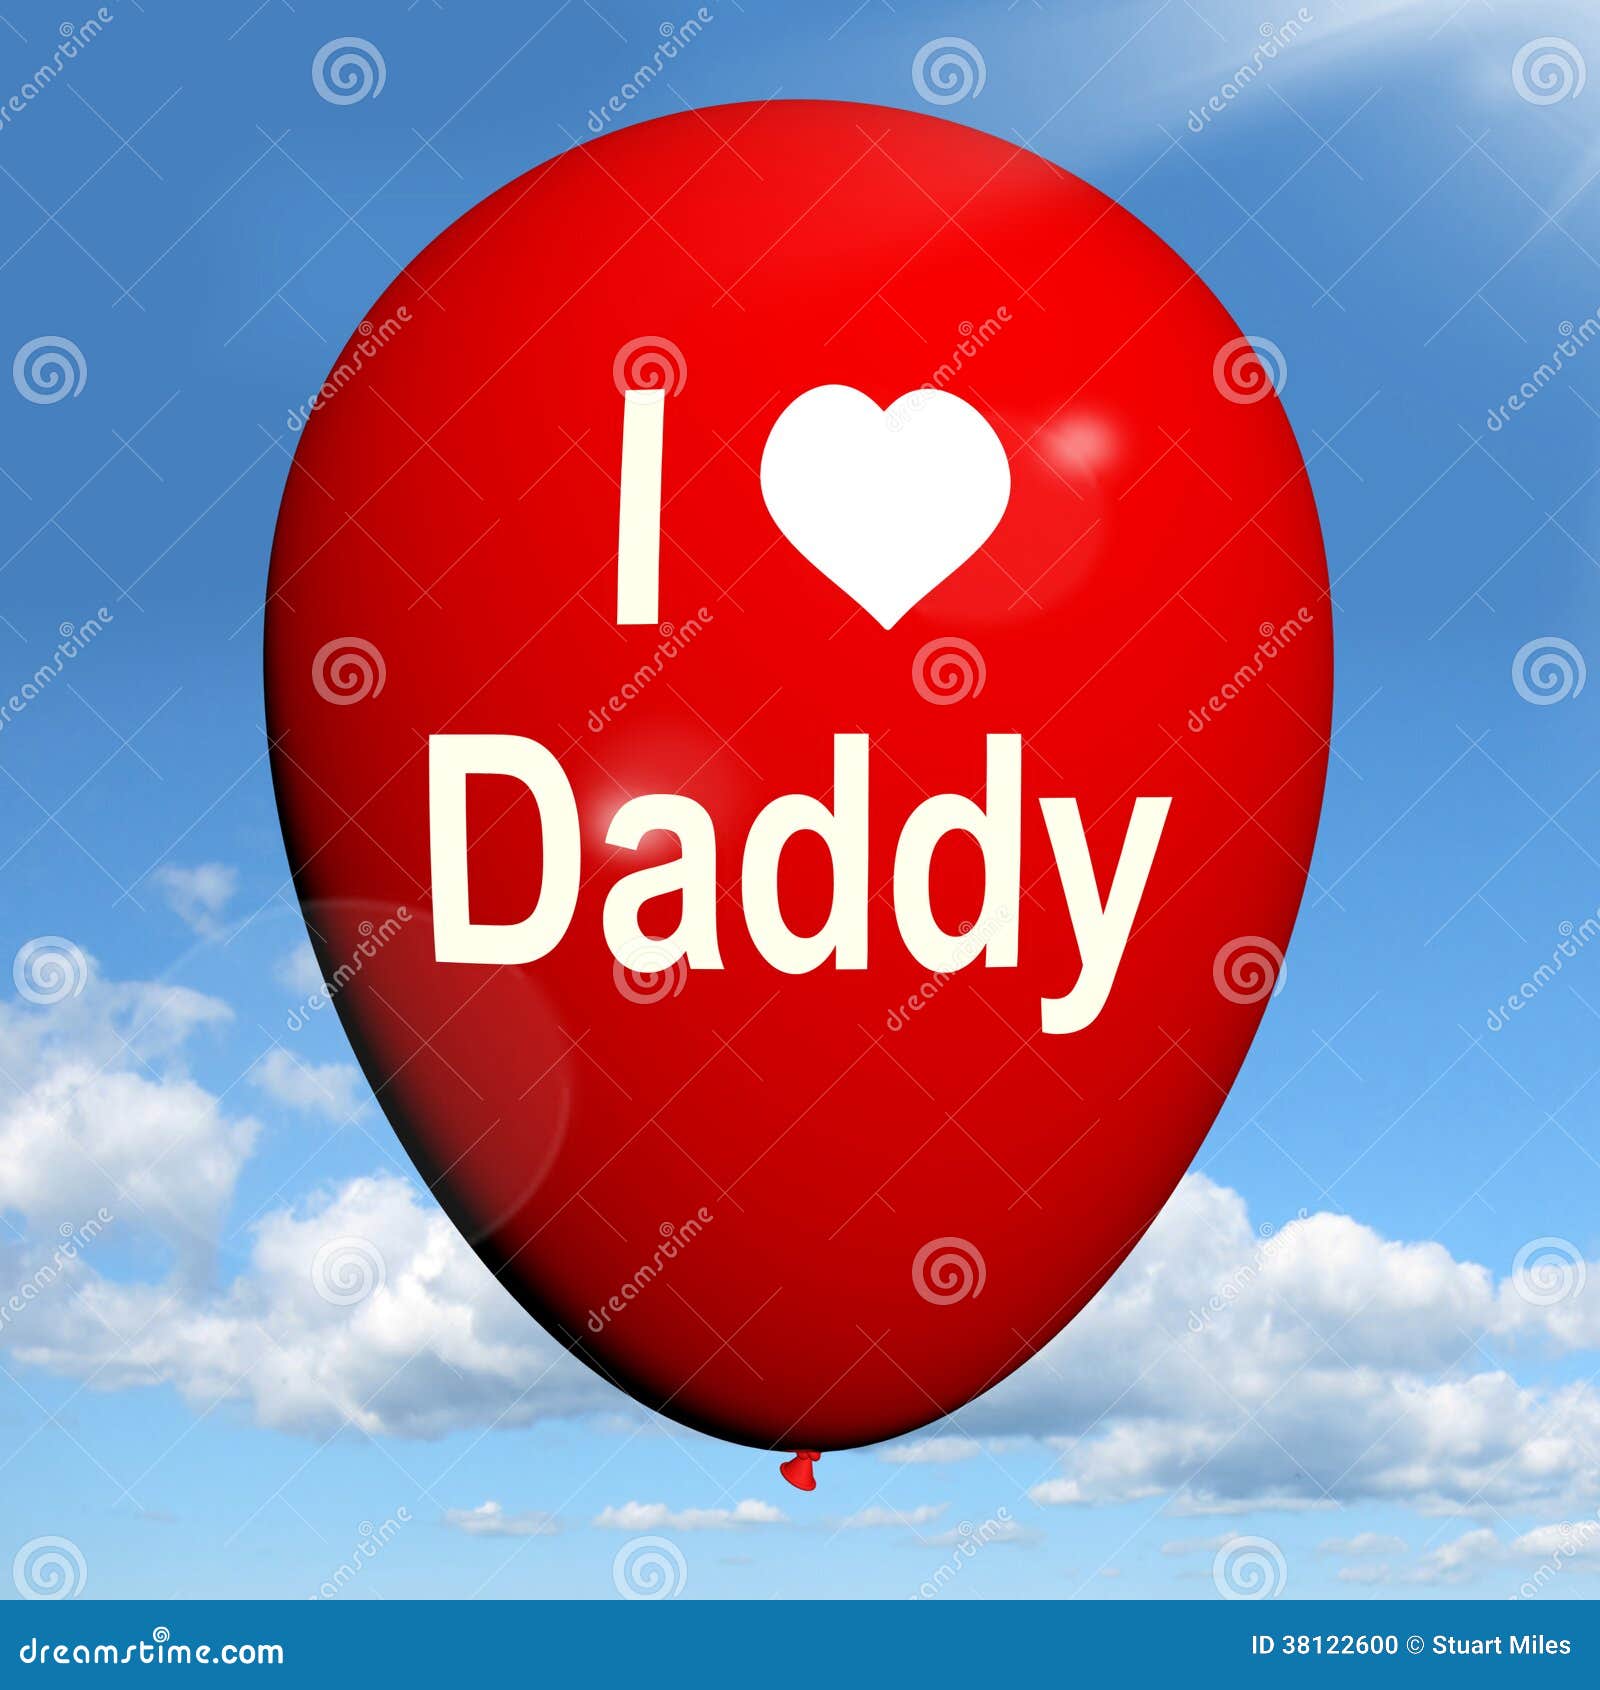 i love daddy balloon shows feelings of fondness